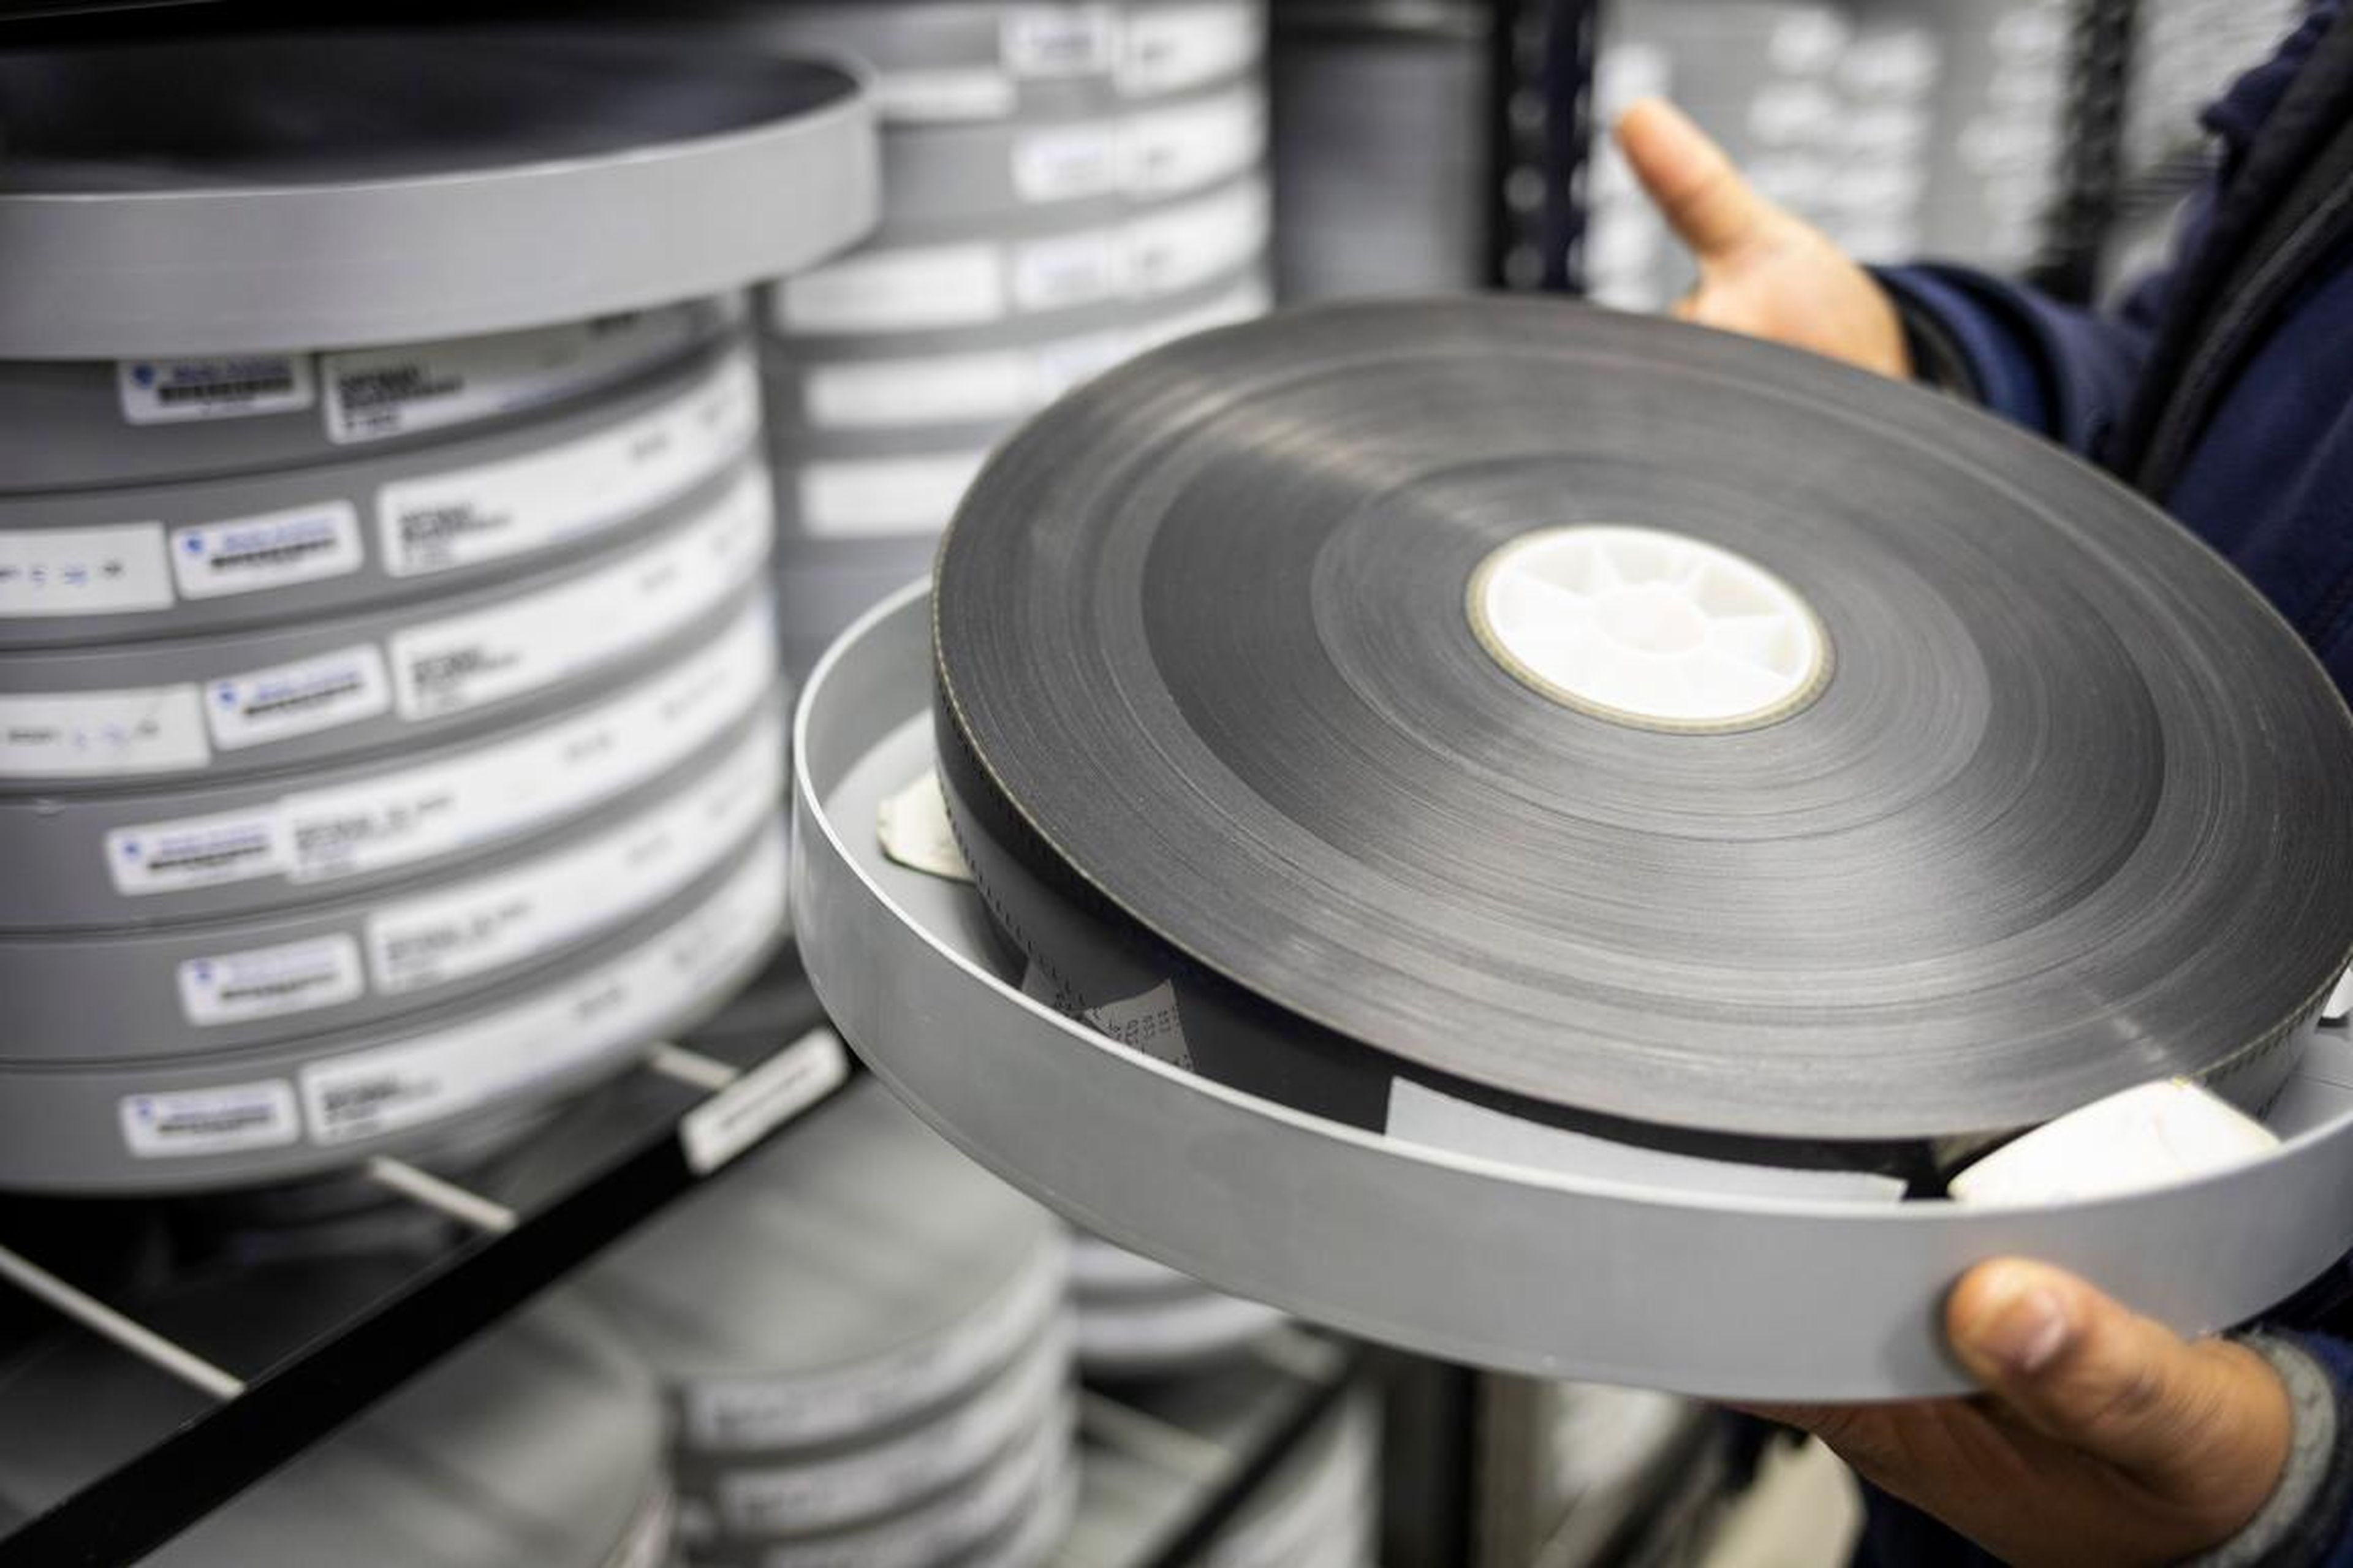 The researchers partnered with Warner Bros. to examine old film archives. Among the archives were radio serials preserved on record-sized glass discs from the 1940s, which were in good condition because of the resilience of the